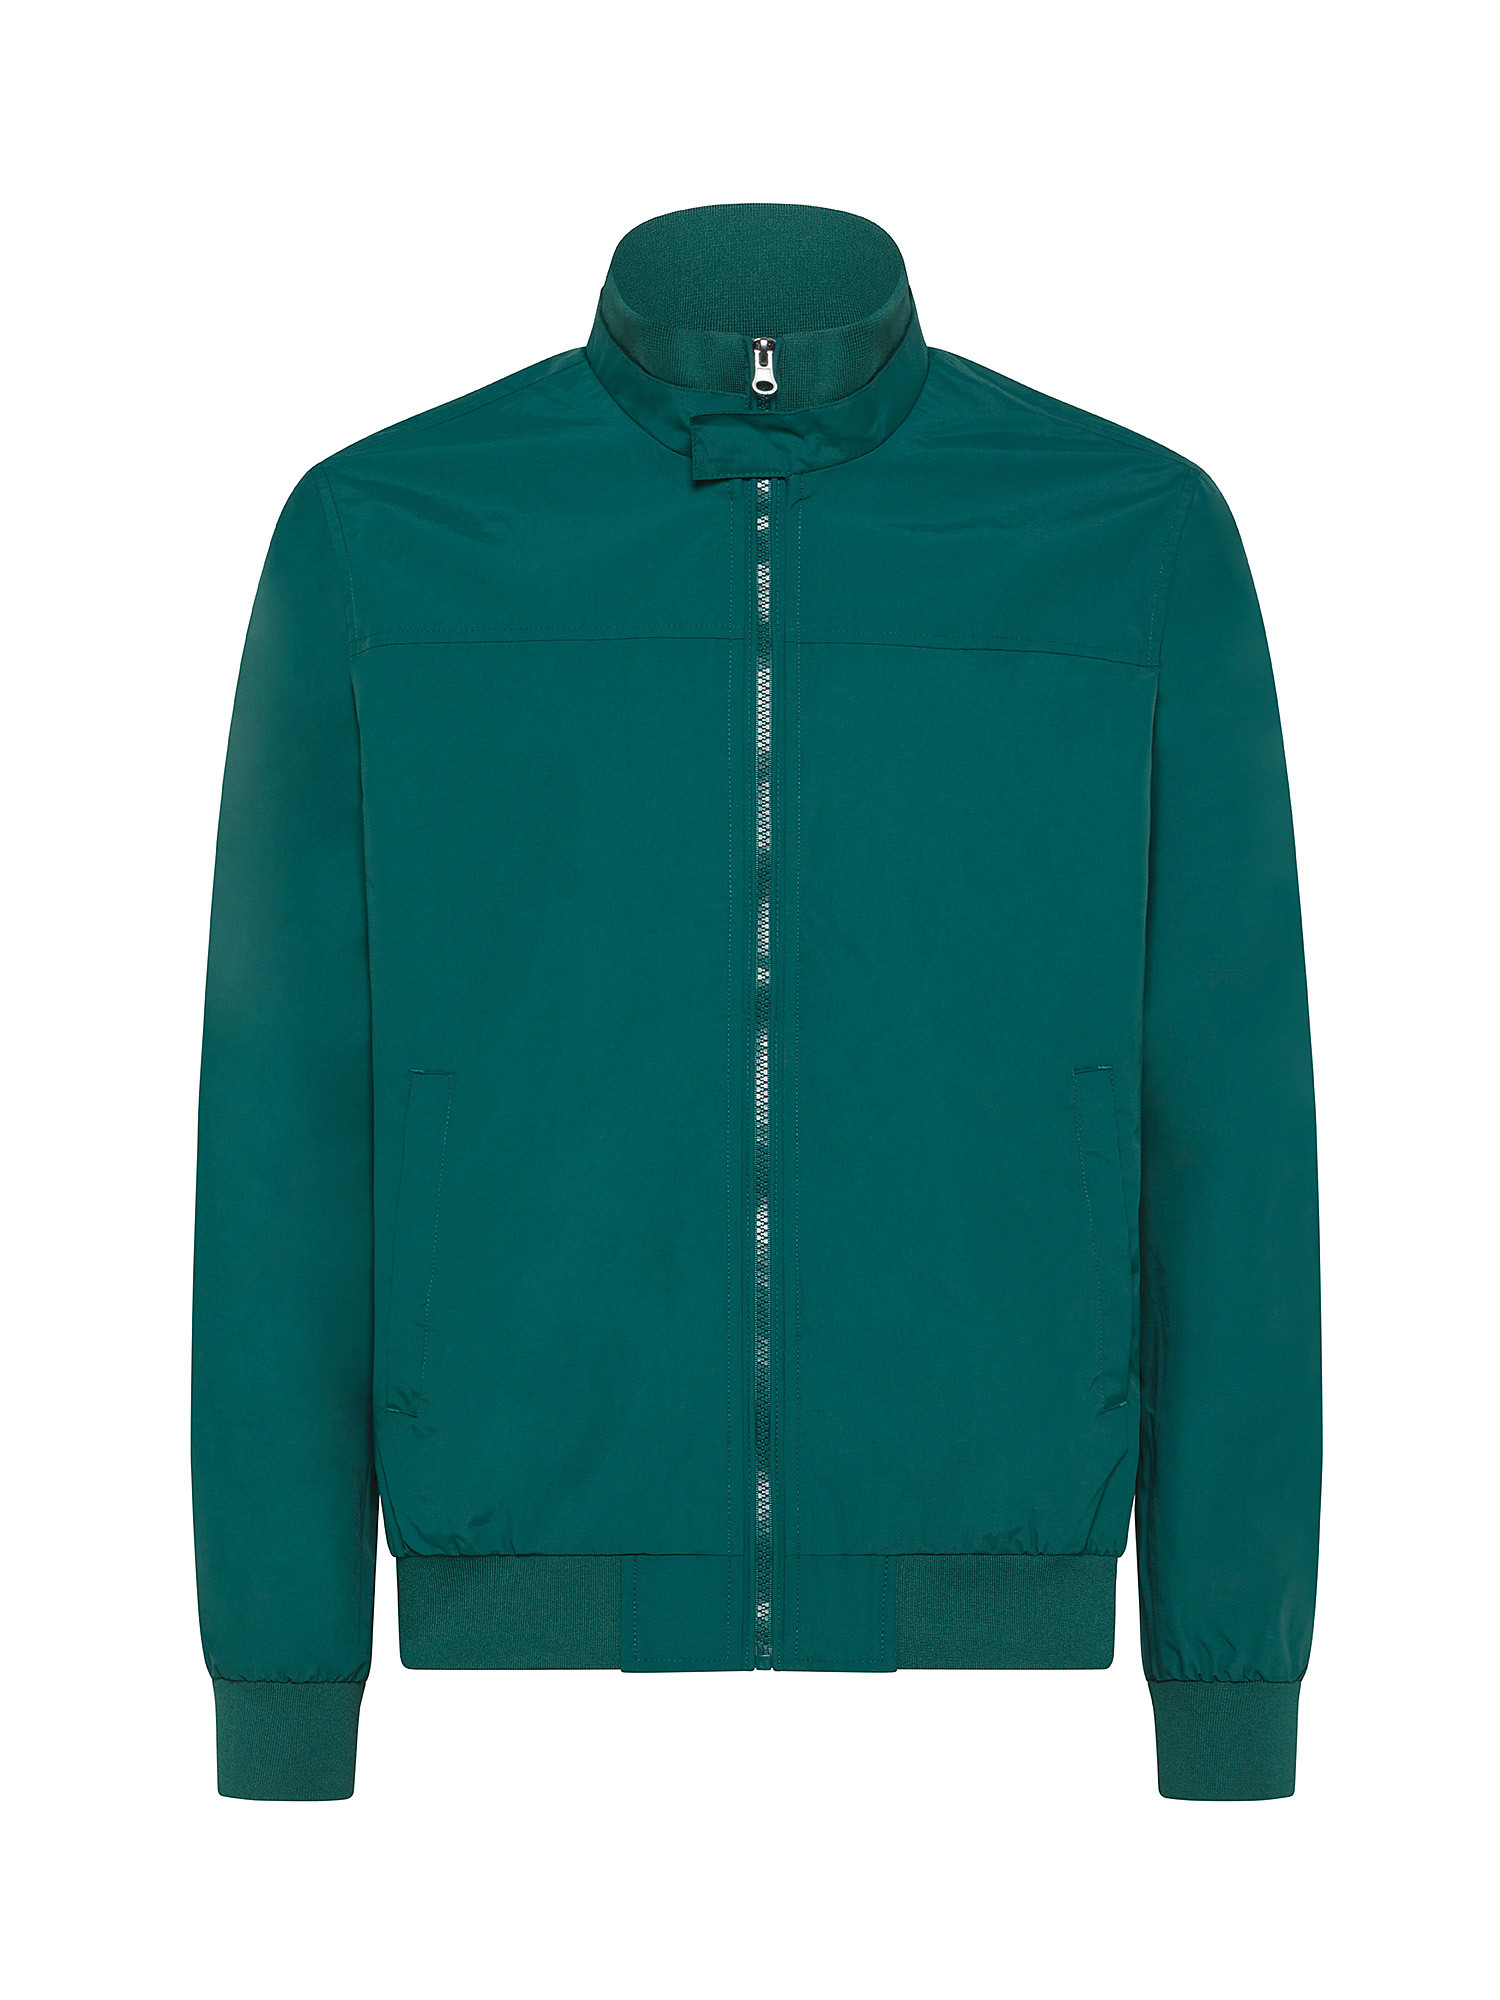 JCT - Giacca full zip, Verde, large image number 0